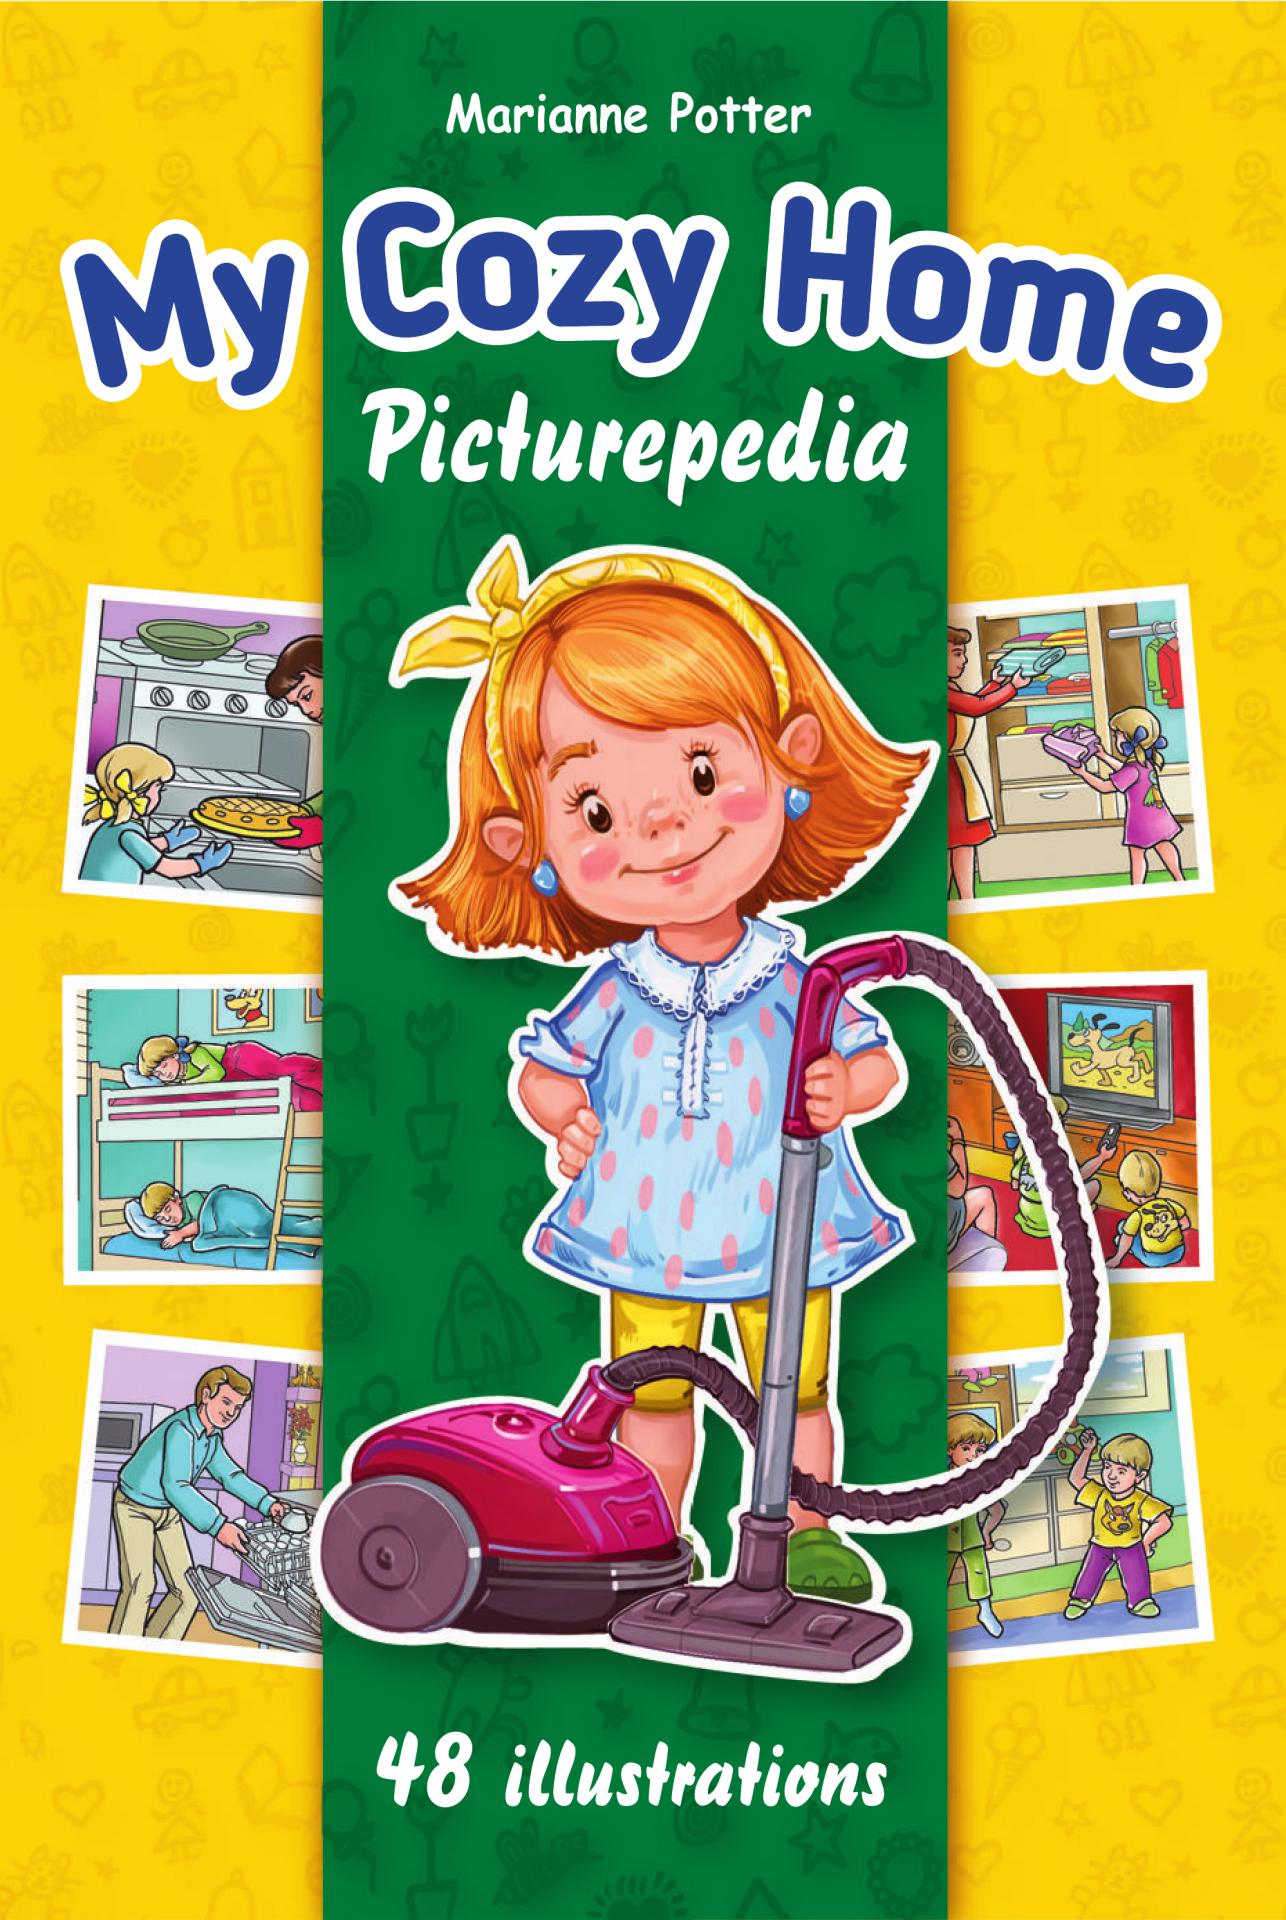 FREE: My Cozy Home Picturepedia: My First Interactive Home Guide by Marianne Potter